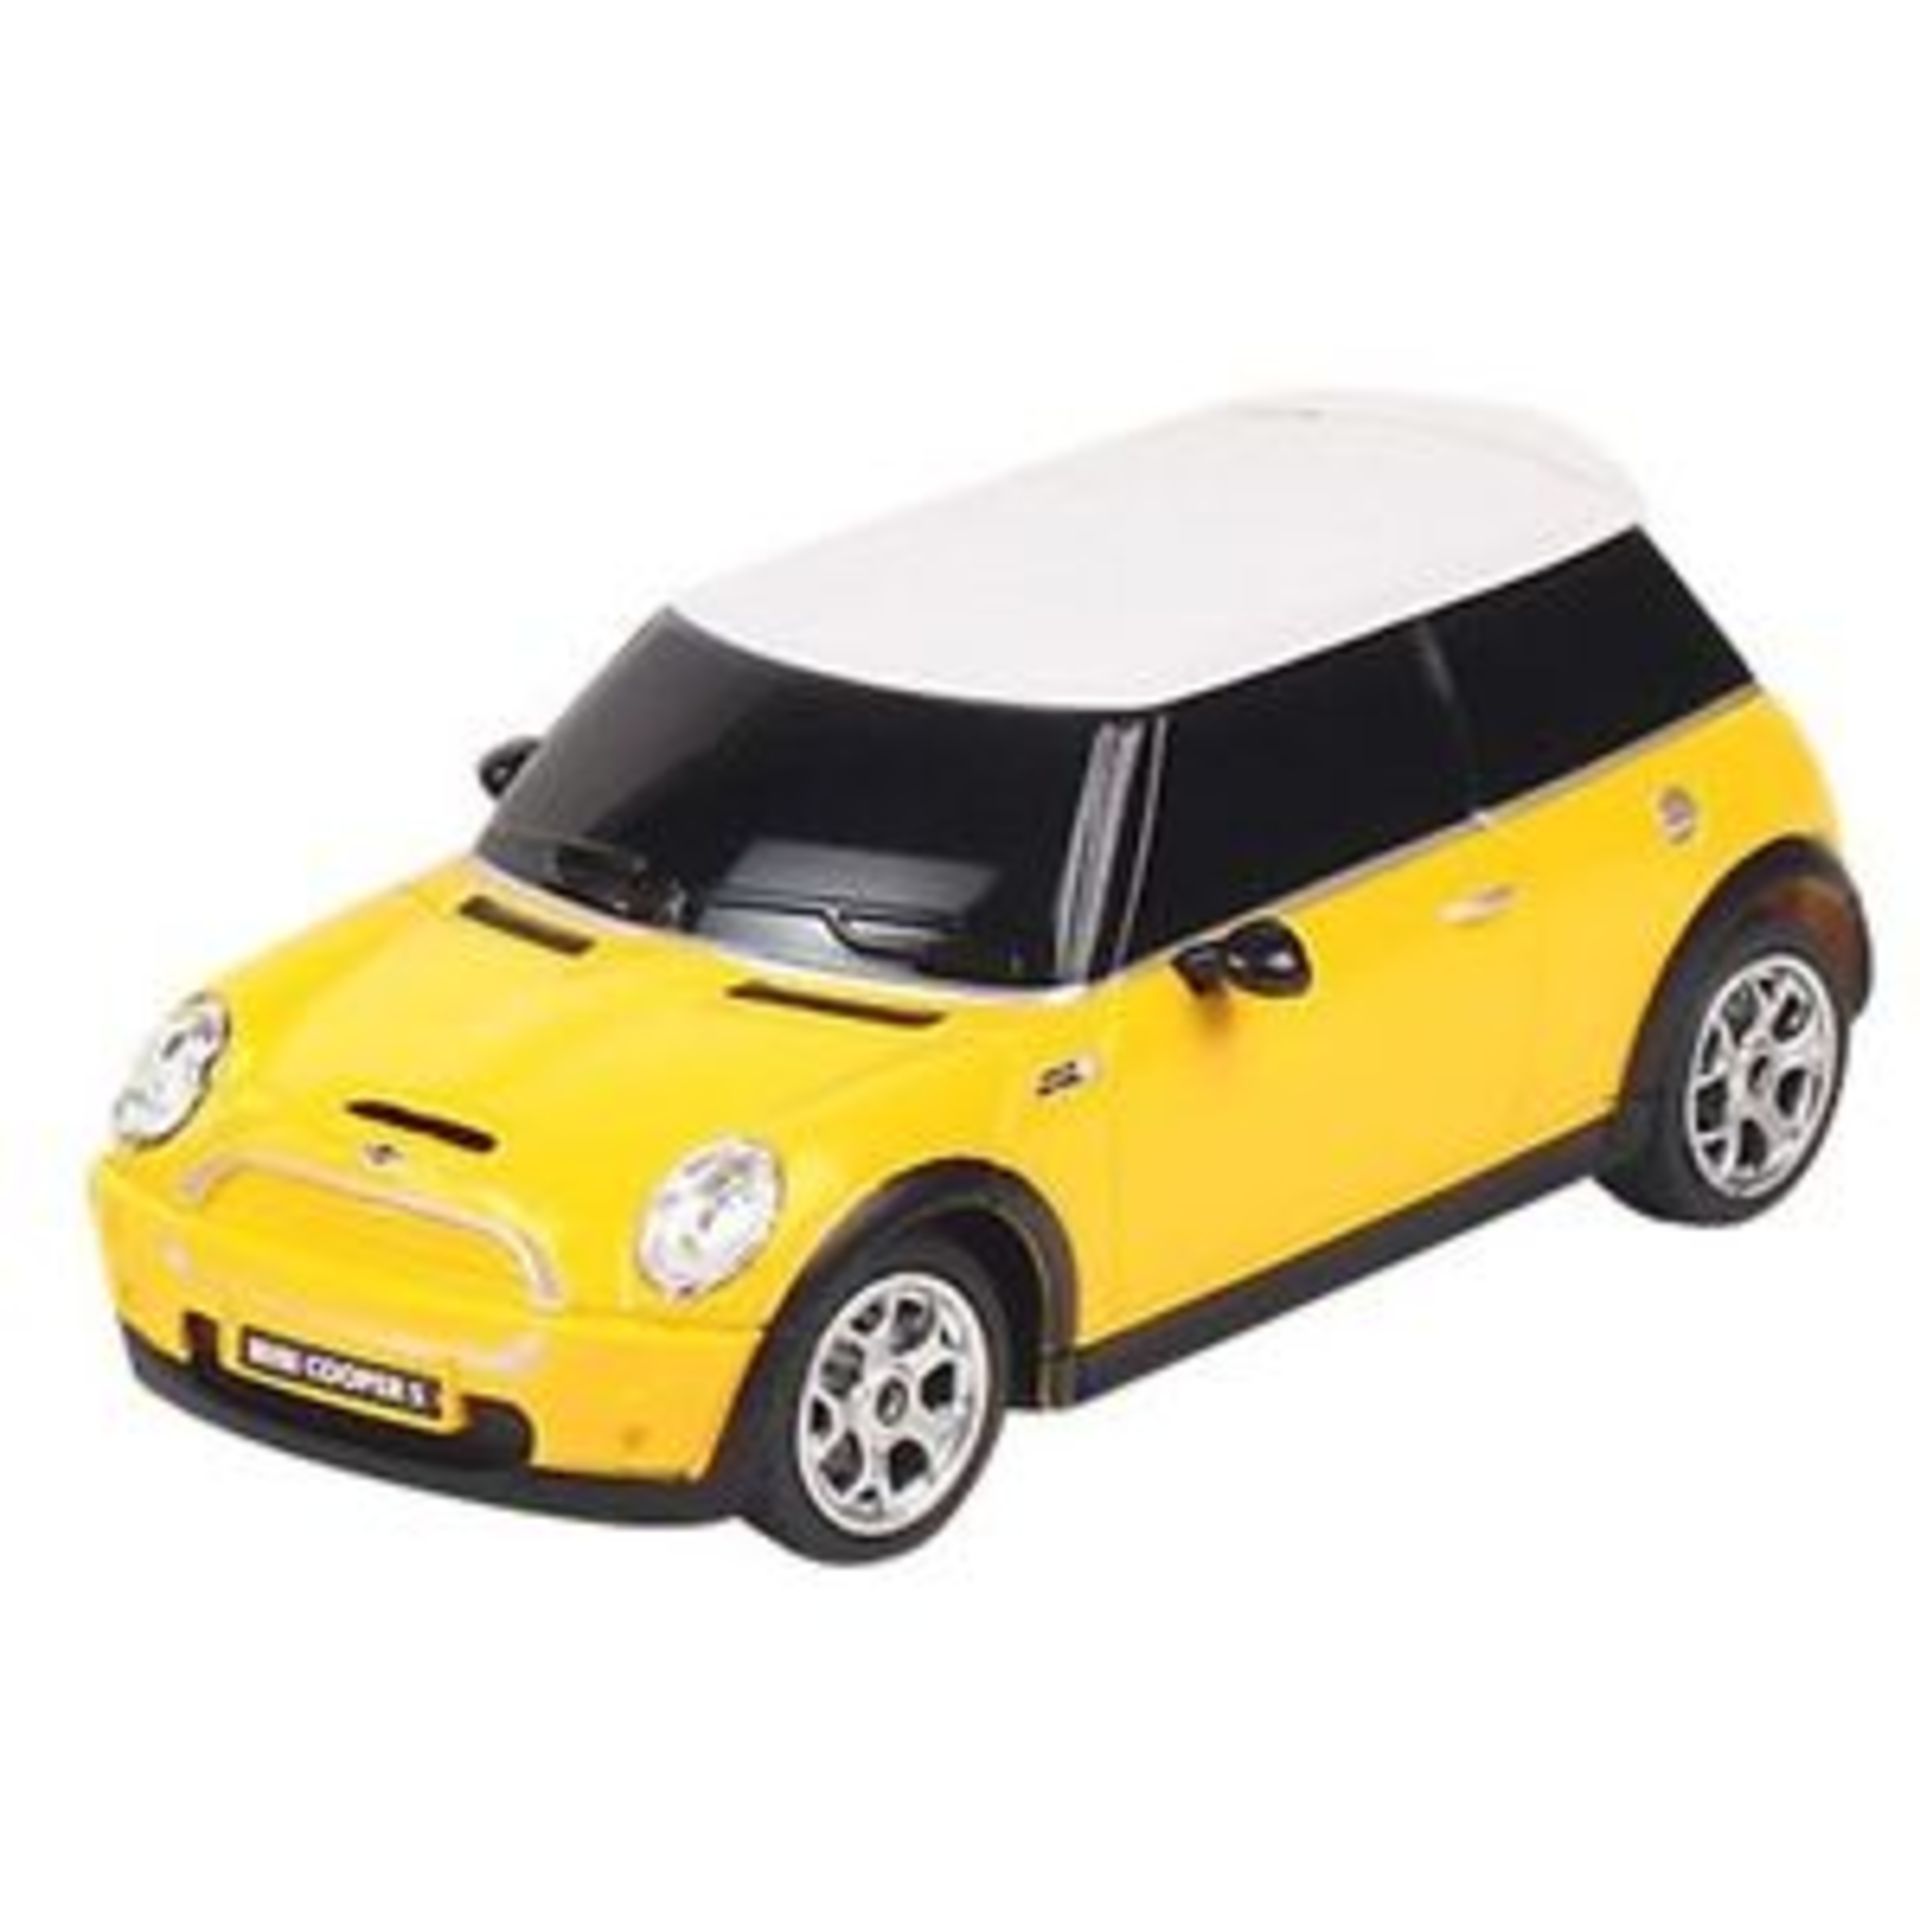 V Brand New 1:24 Scale Mini Cooper S Full Function Radio Control - Official Merchandise - In Yellow